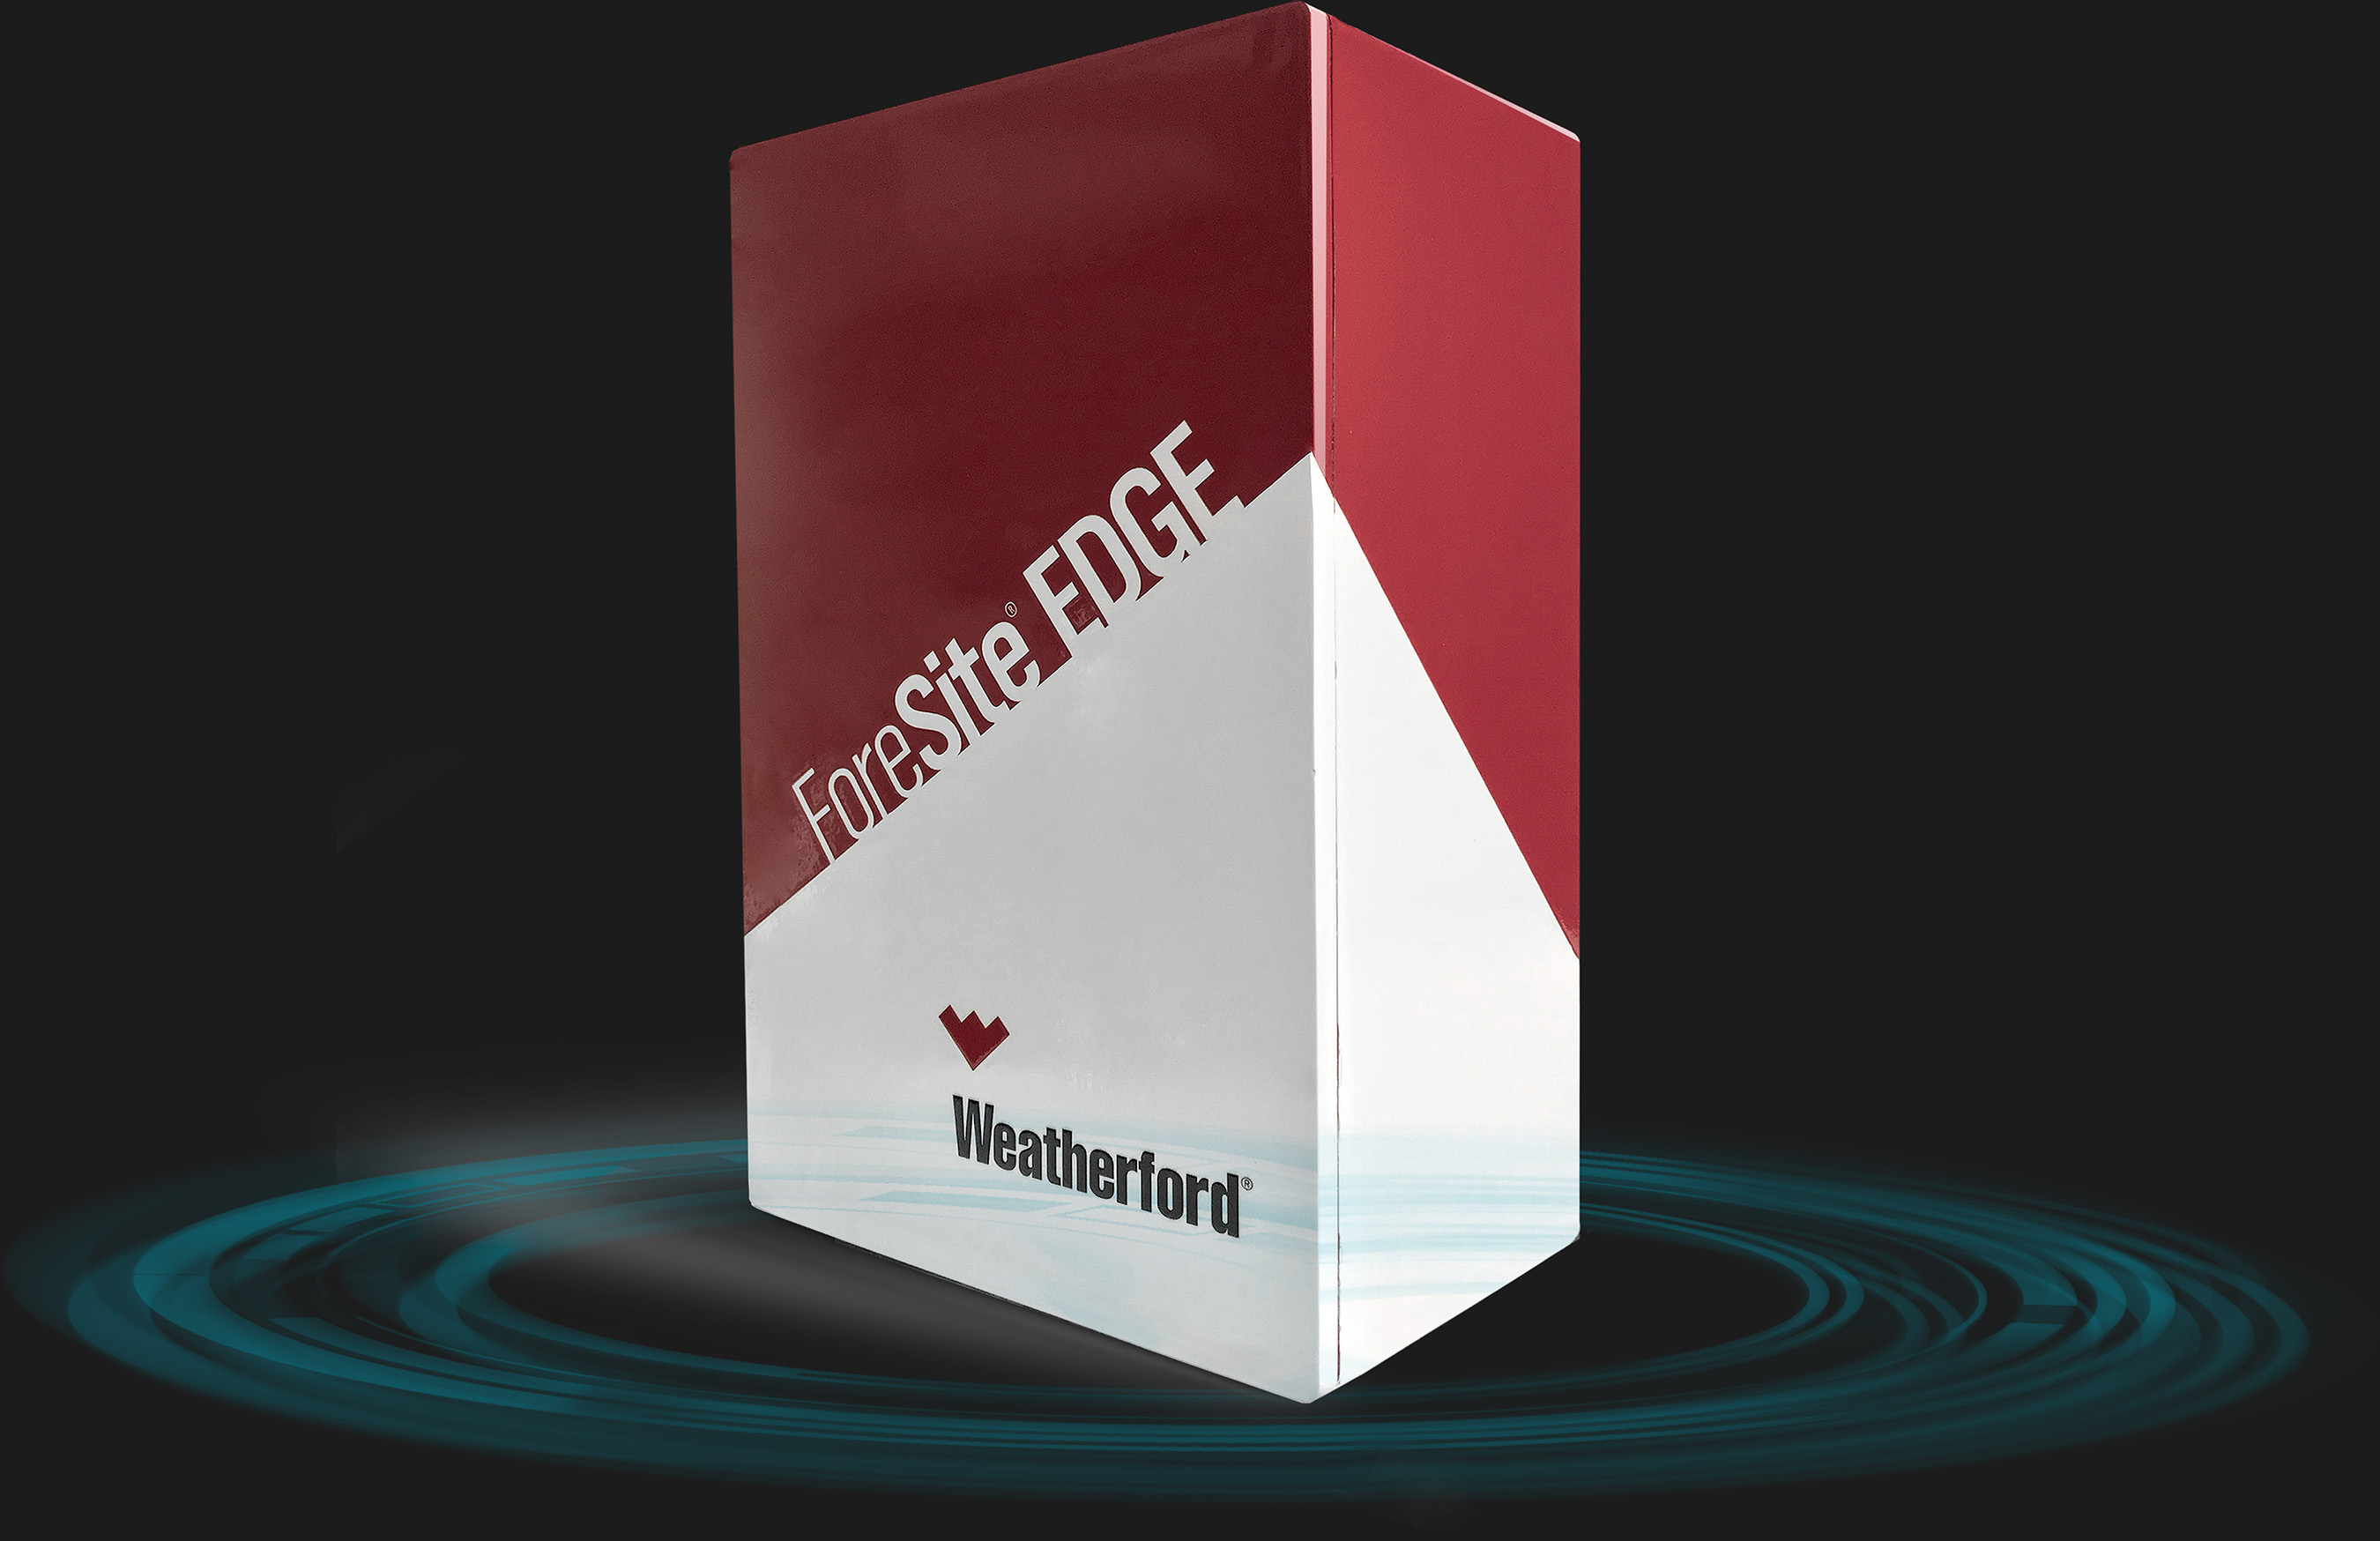 ForeSite® Edge is a next-generation artificial-lift controller that delivers full closed-loop optimization, autonomous control, and instant IoT-based notifications without needing human intervention.